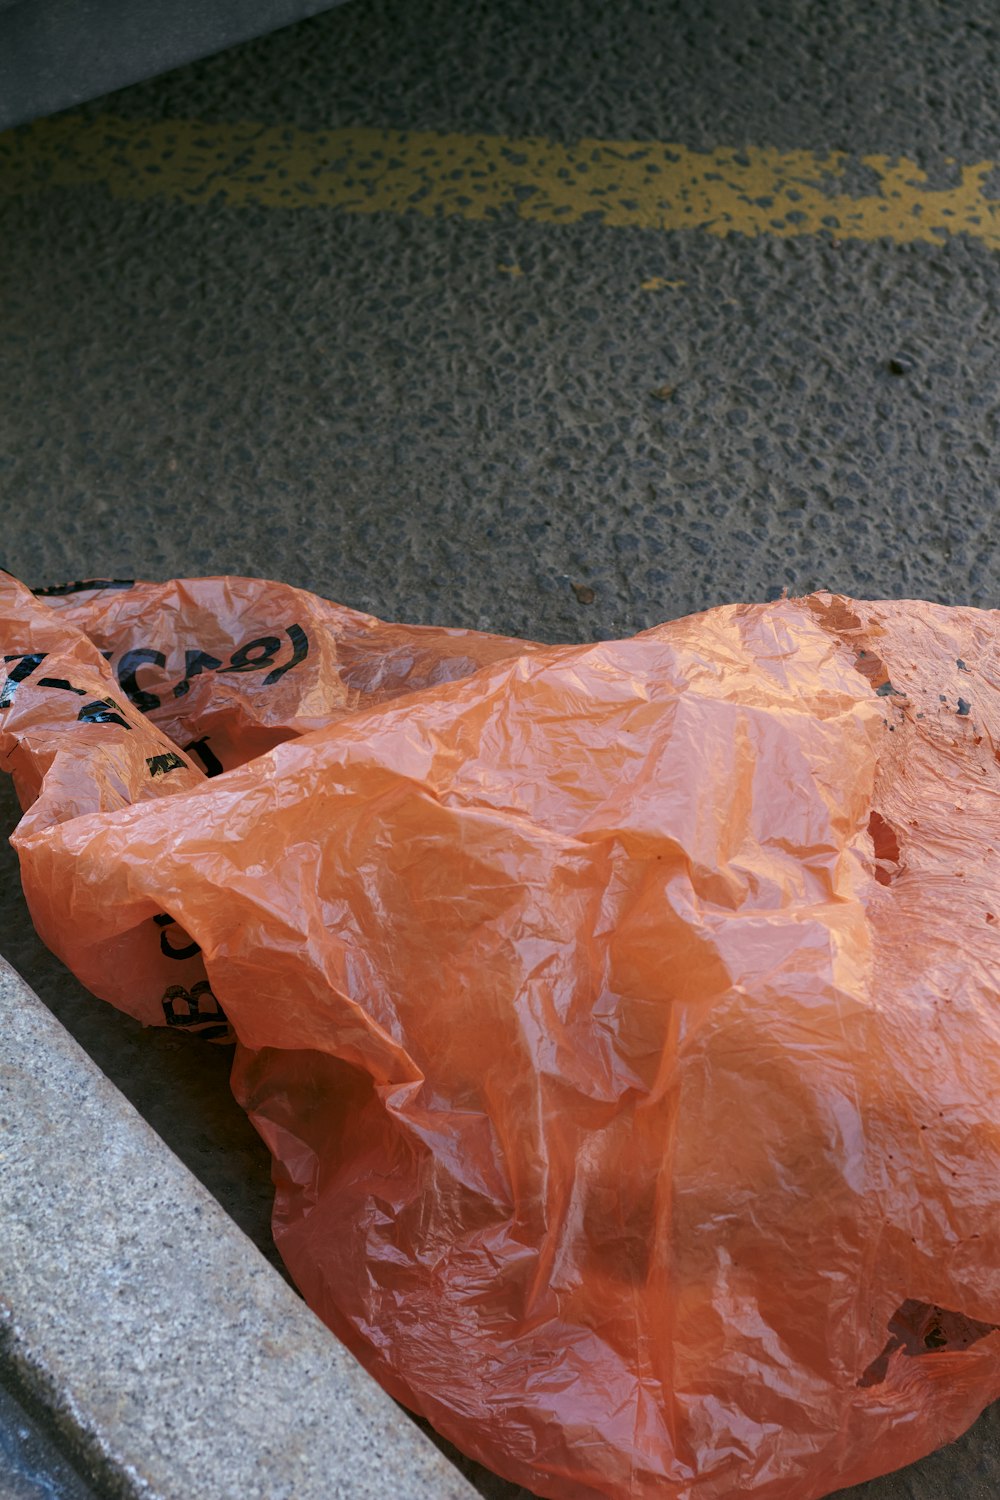 an orange plastic bag sitting on the side of a road